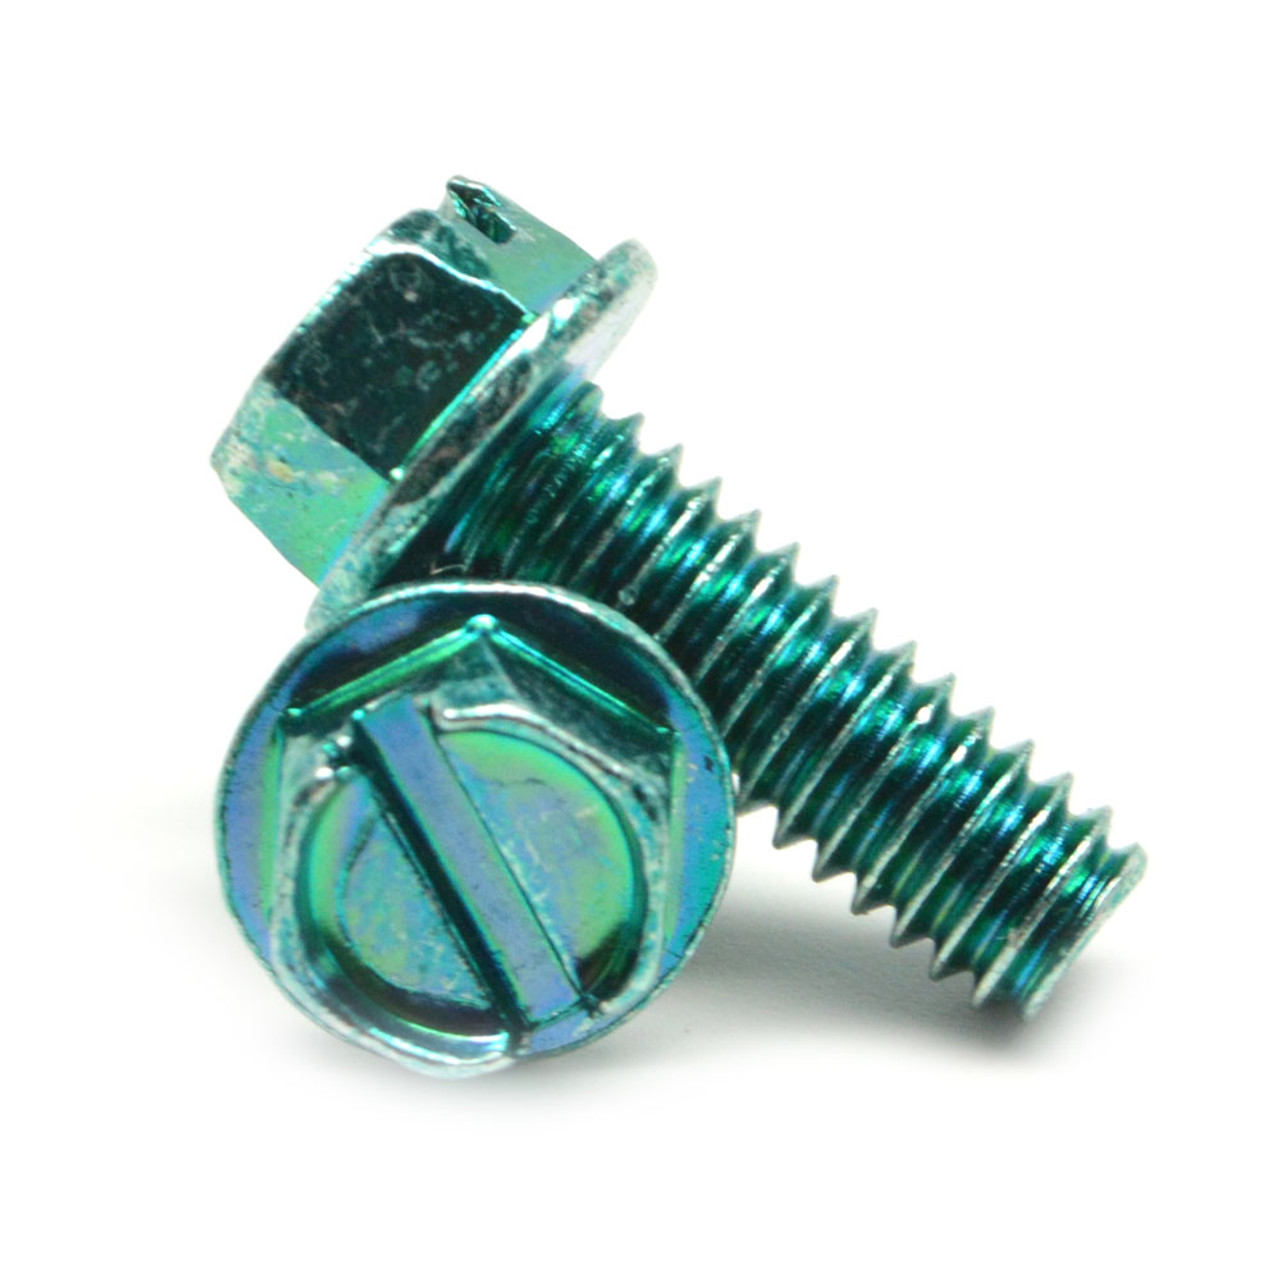 #6-32 x 1/4" (FT) Coarse Thread Machine Screw Slotted Hex Washer Head Low Carbon Steel Green Zinc Plated